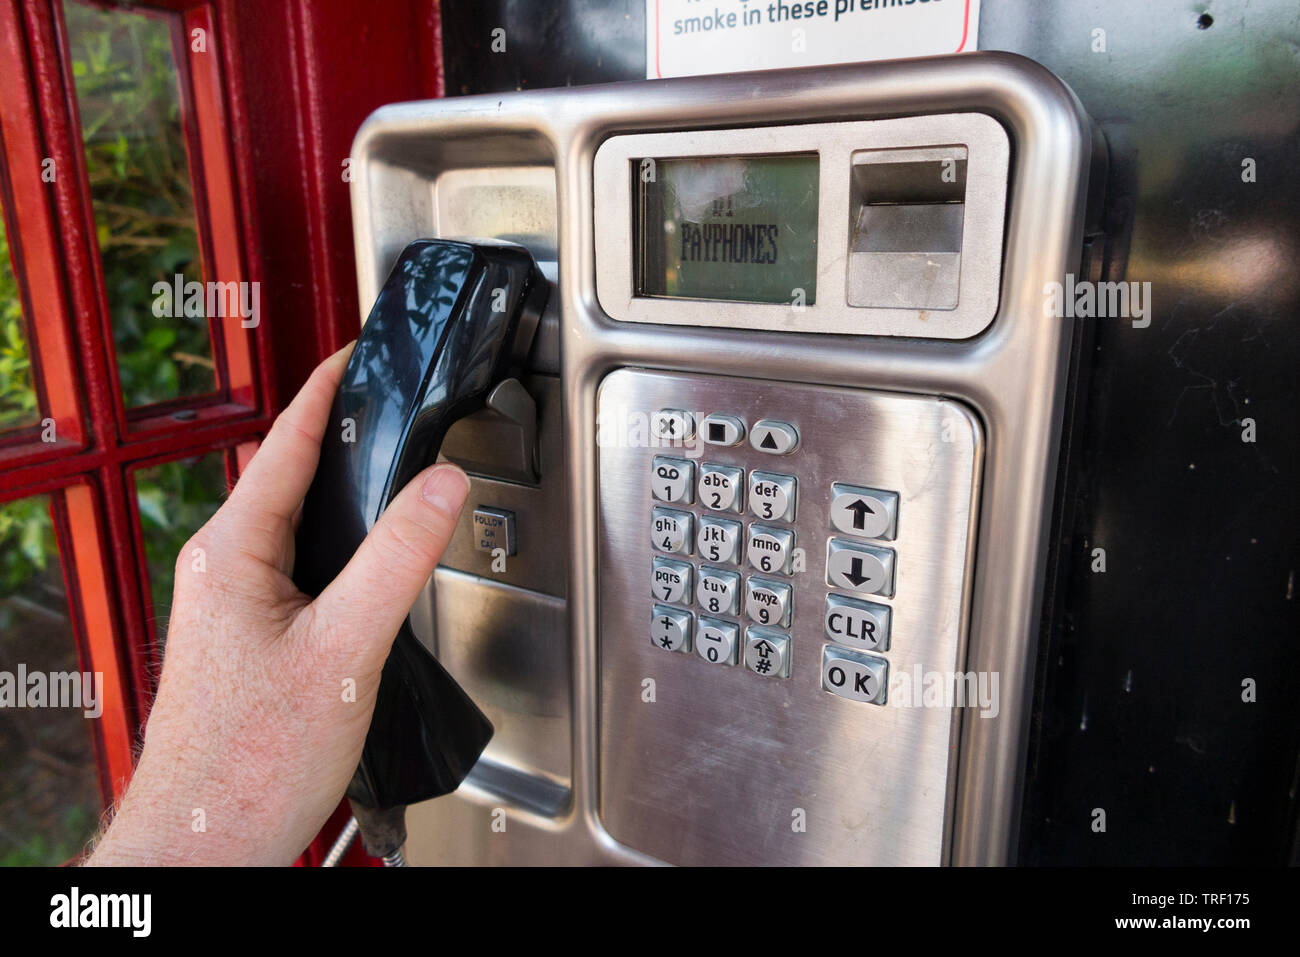 Person lifting the handset and preparing to dial a number / dialling from a late model coin operated public telephone / payphone pay phone in an original red / call box. England UK Stock Photo